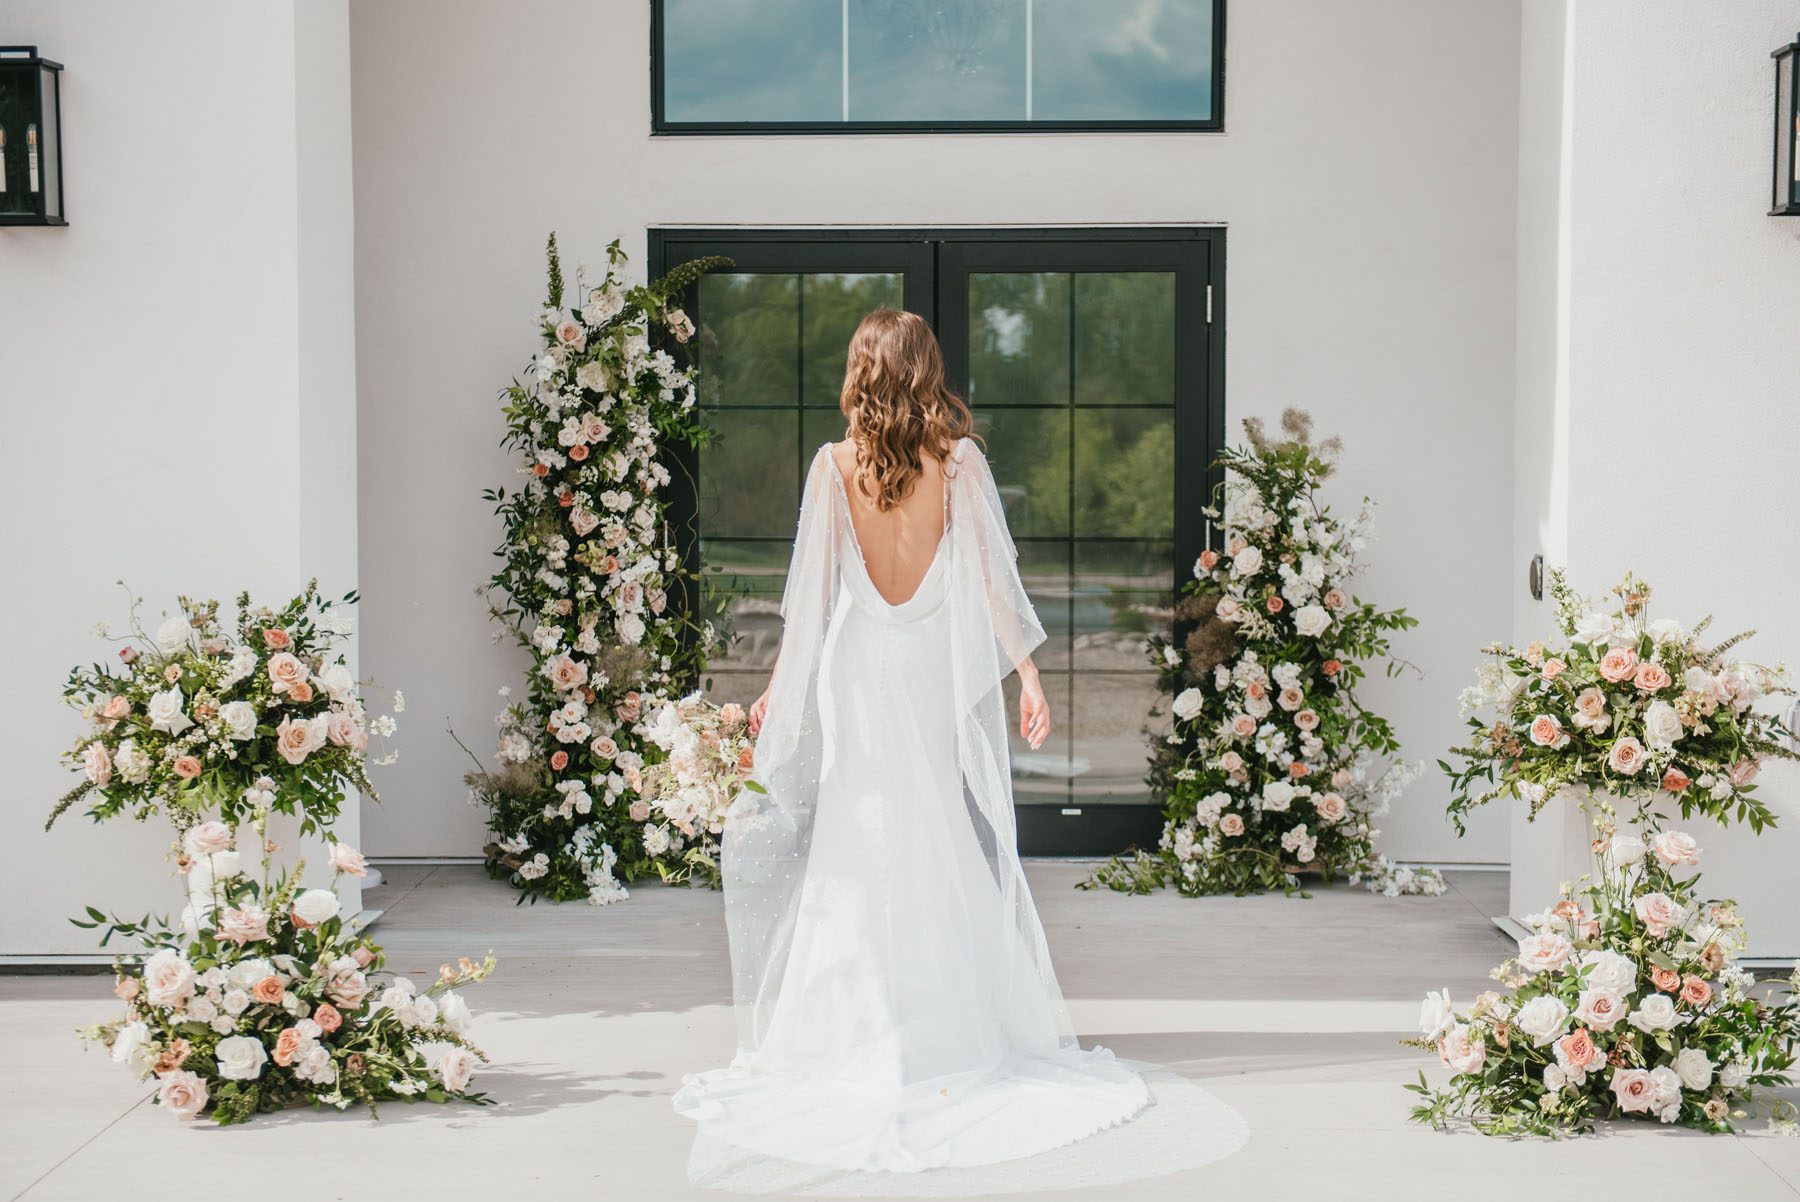 Bride standing in front of a glass door surrounded by peach, blush, white floral arrangements